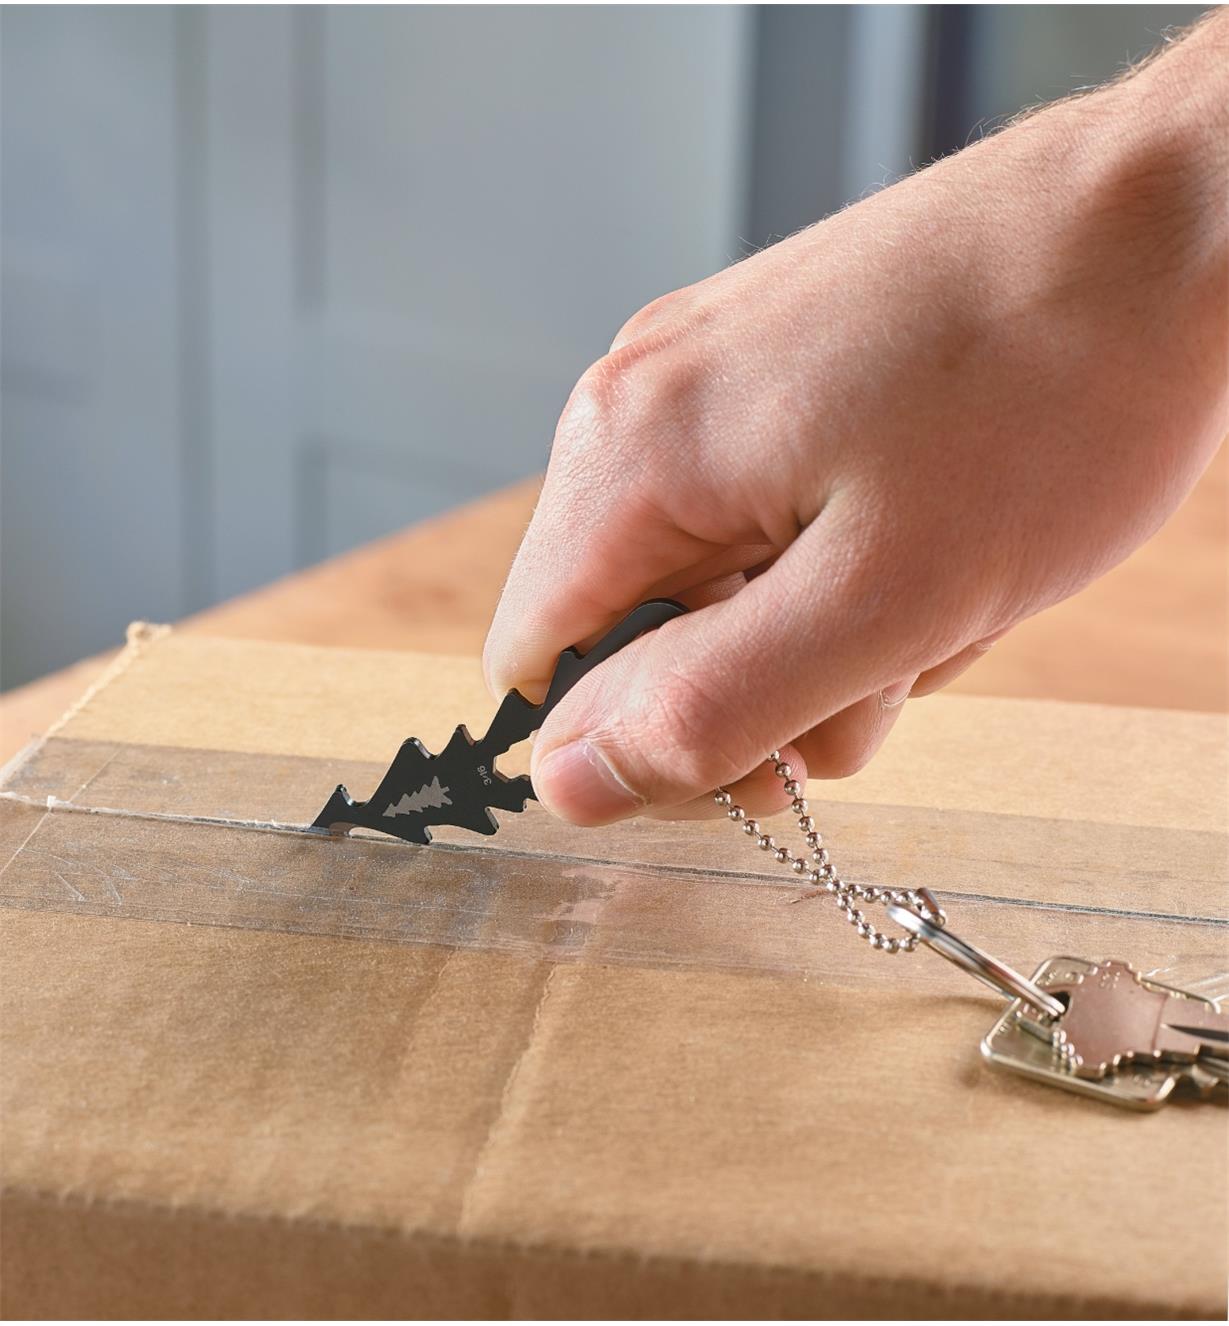 Using the Lee Valley Key-Chain Multi-Tool to cut the tape sealing a cardboard box 